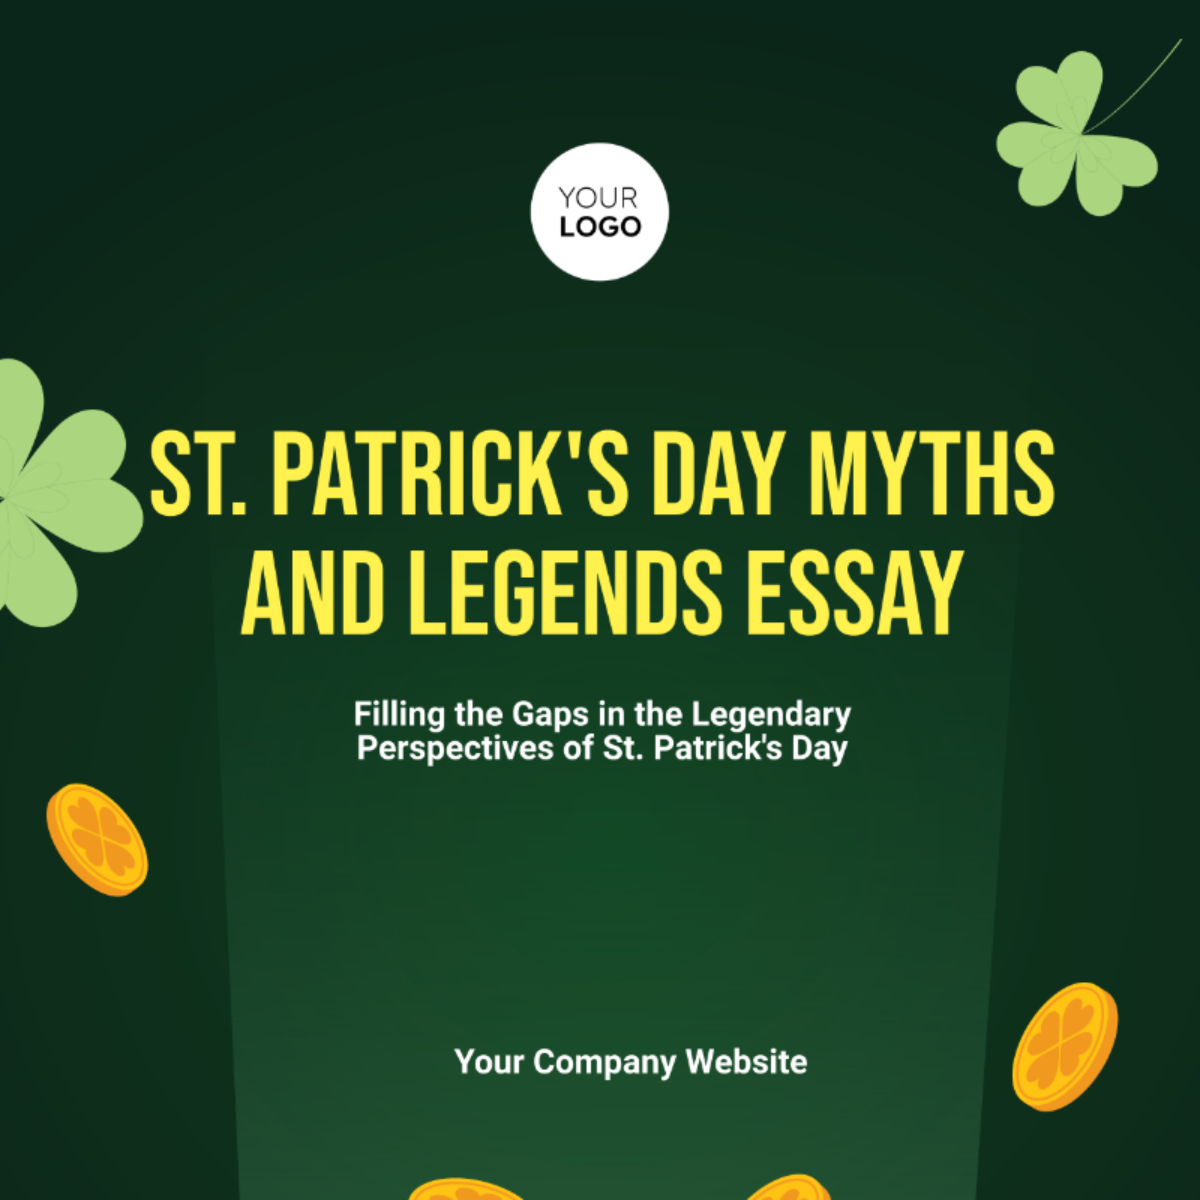 Free St. Patrick's Day: Beyond the Myths and Legends Essay Template